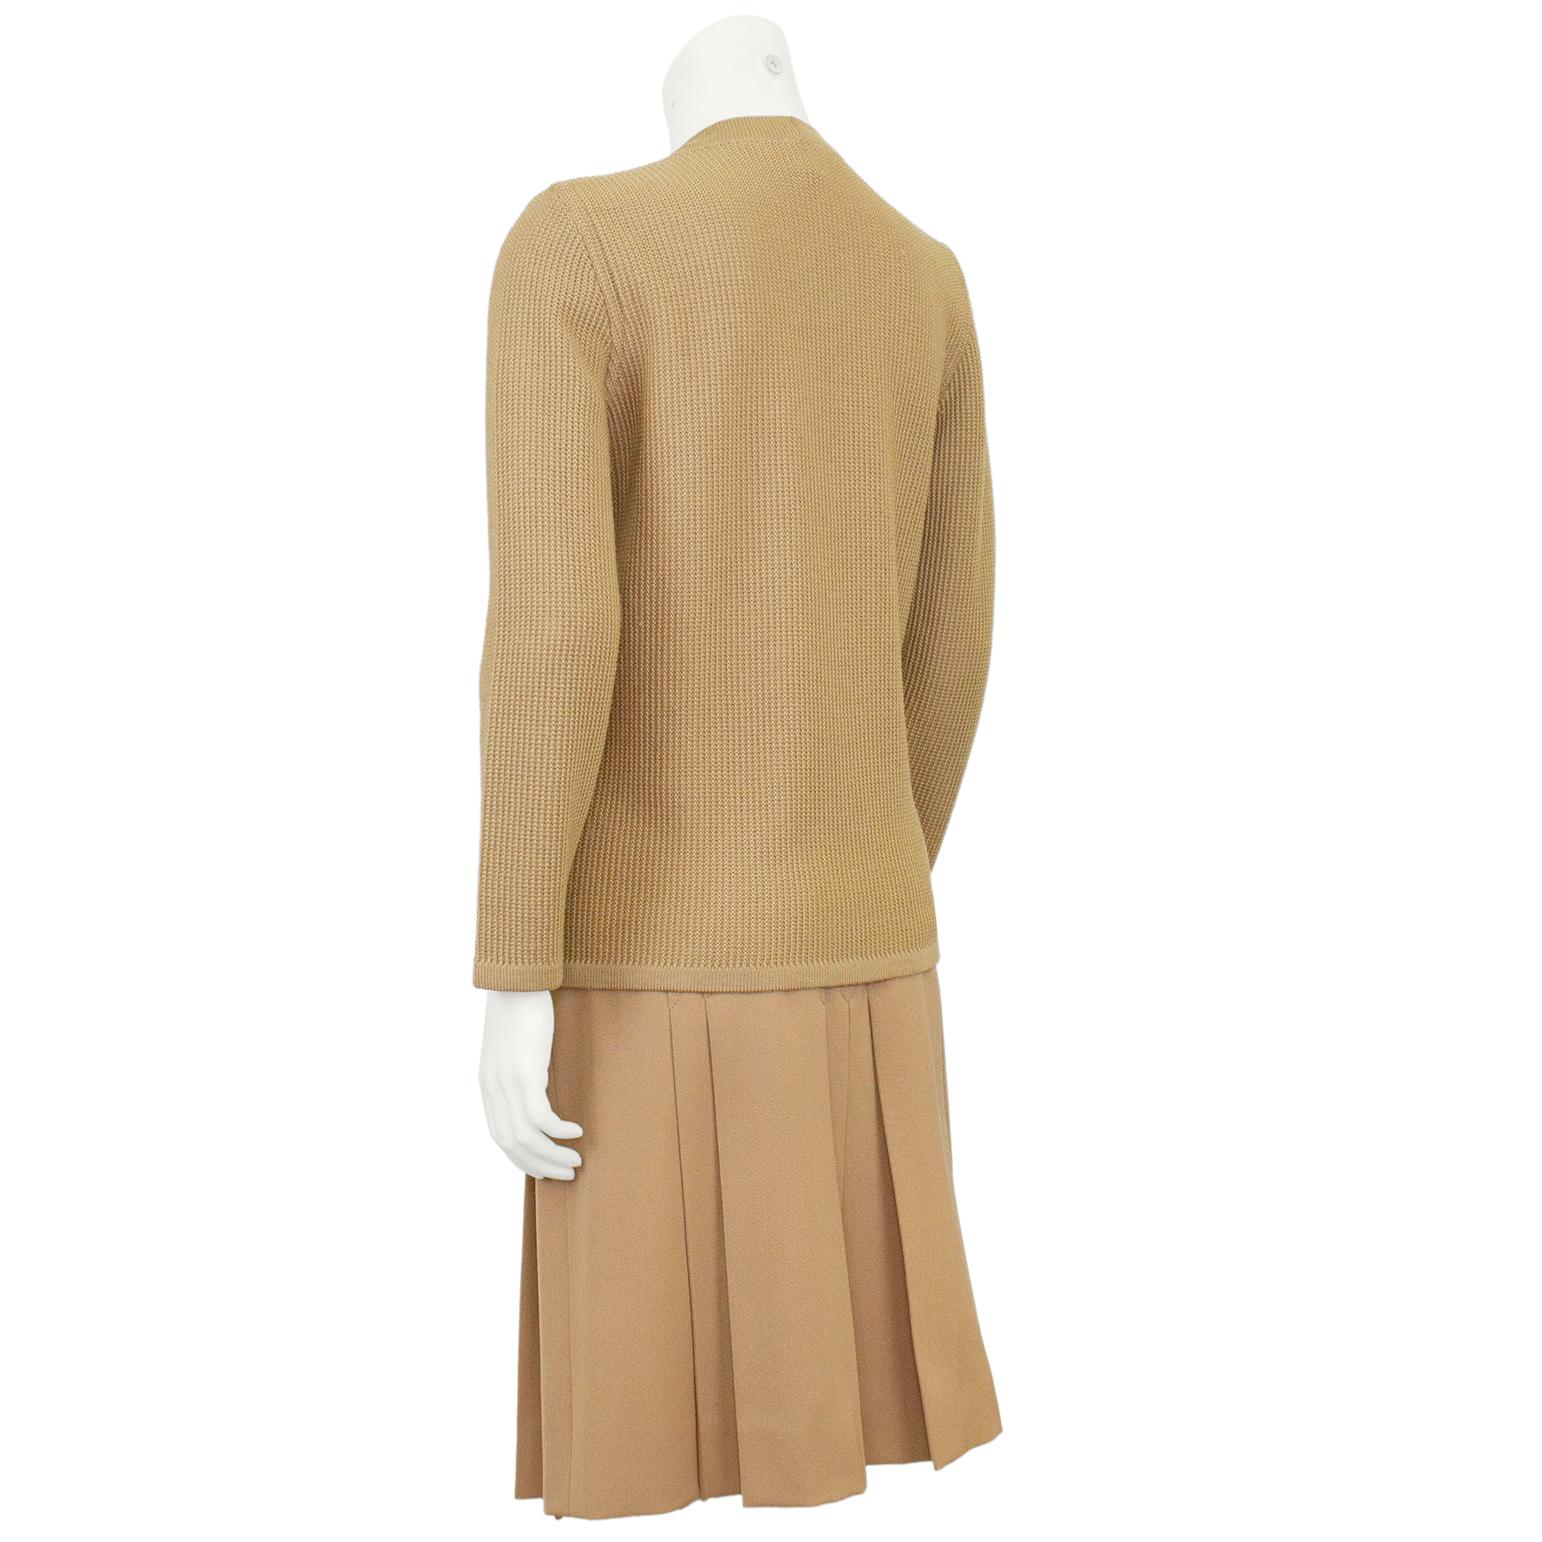 1970s Celine Beige Wool Cardigan and Gabardine Skirt Ensemble In Good Condition For Sale In Toronto, Ontario